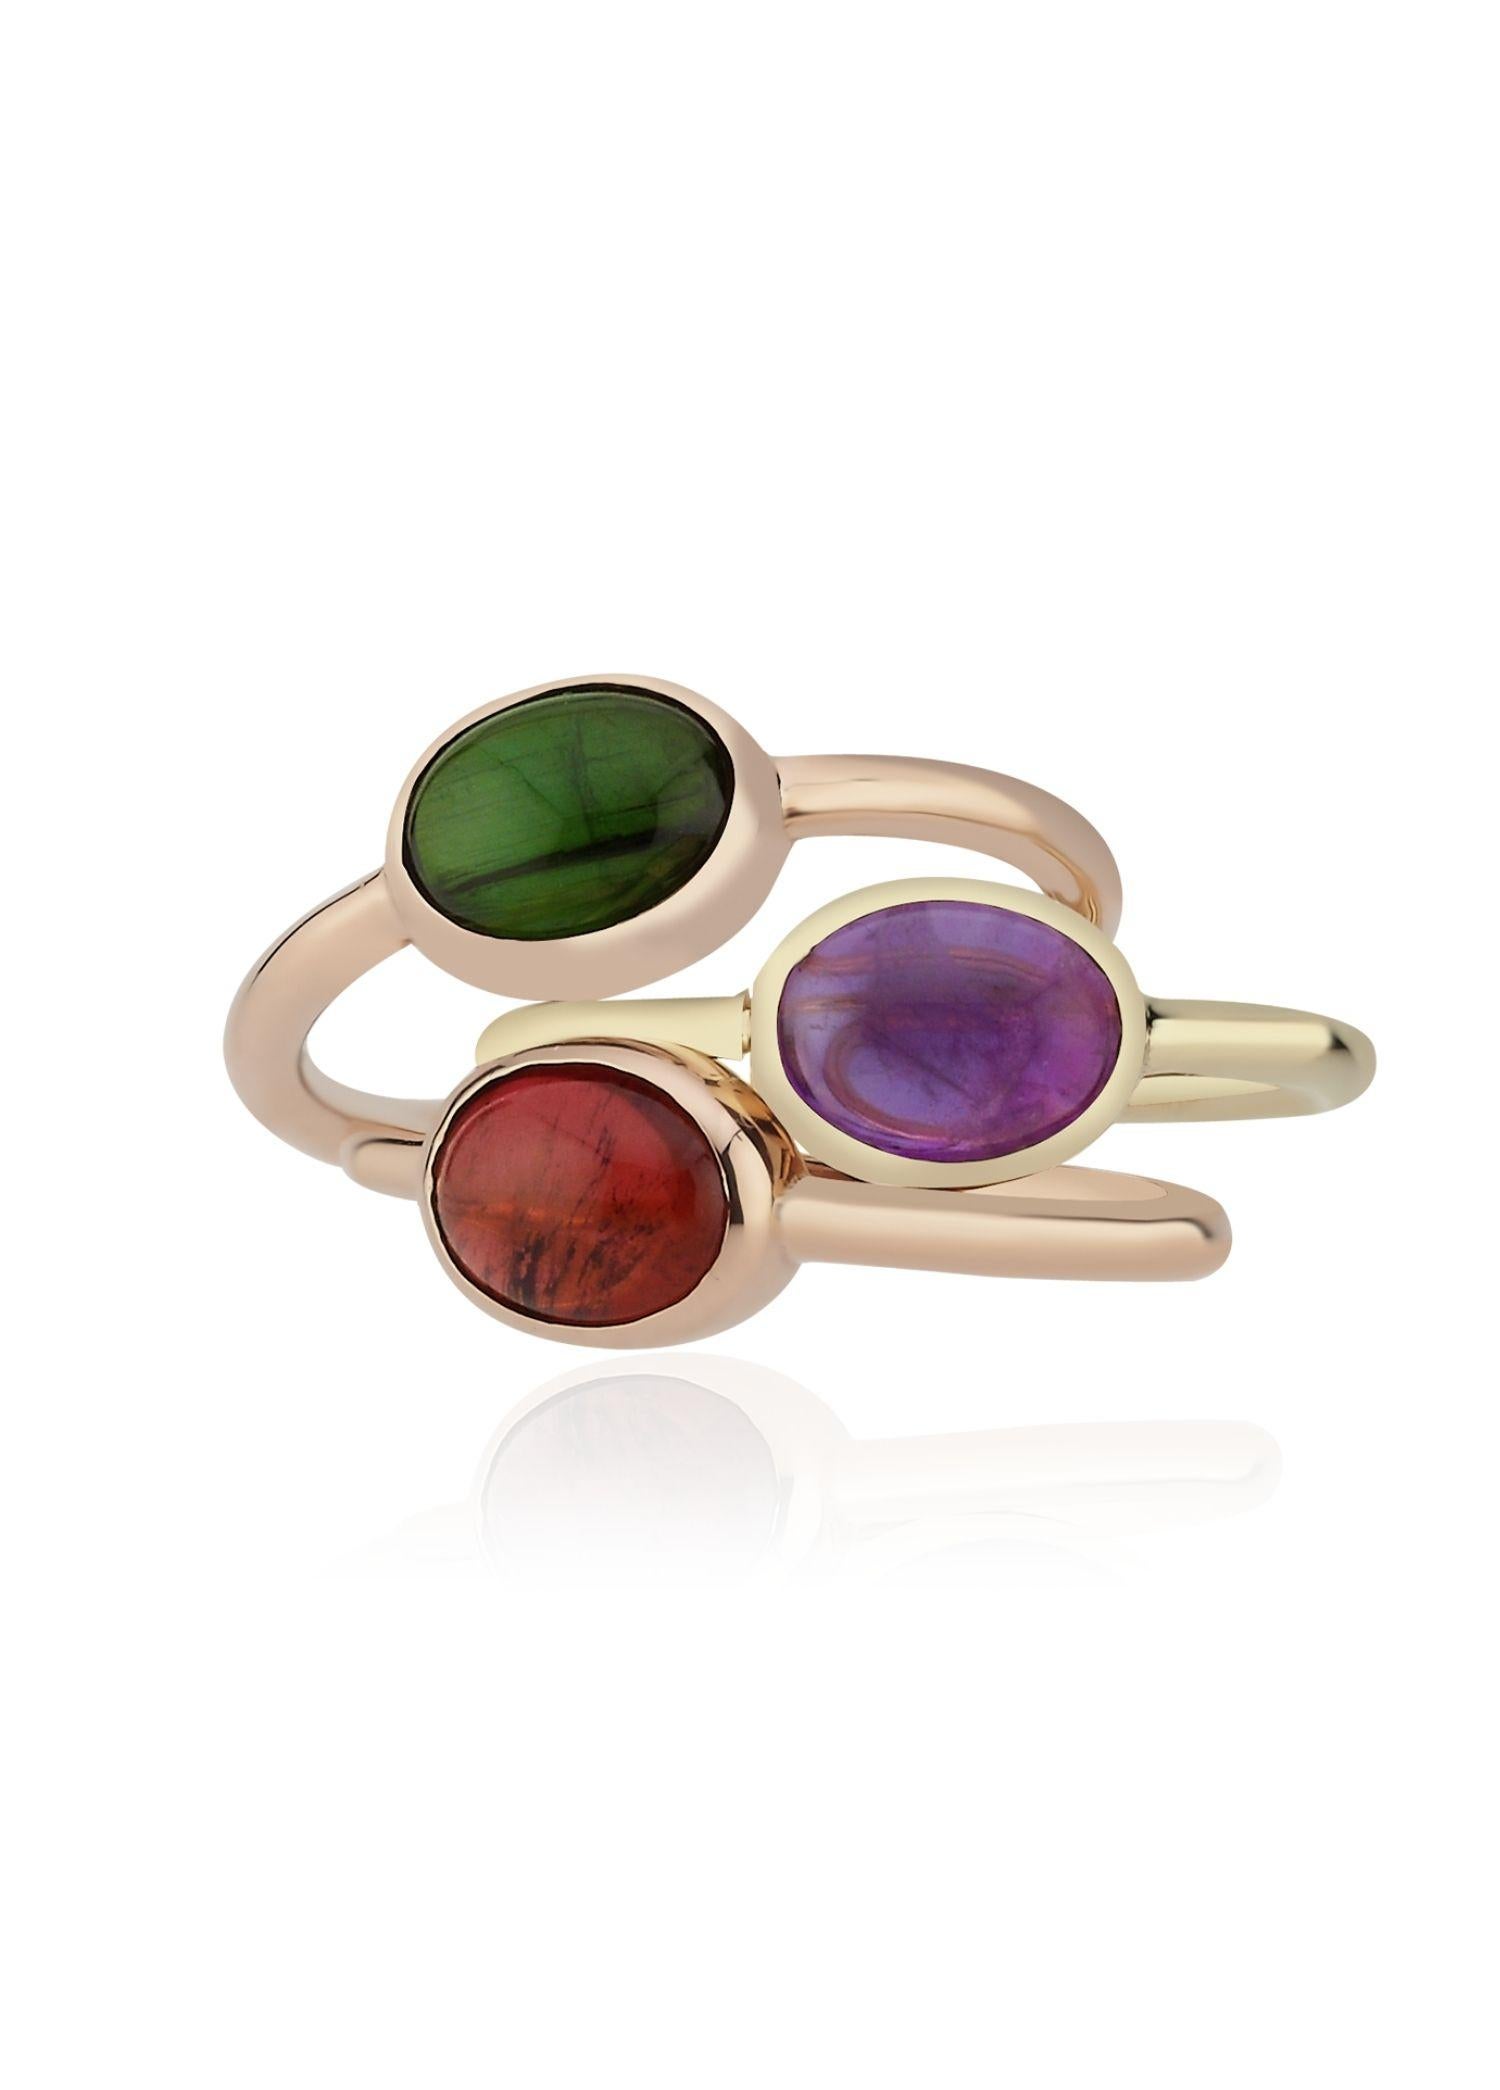 Melie Jewelry Gem Ring with Tourmaline

14K Rose Gold, 1.83 ct Tourmaline

The Story Behind
The gemstone rings designed with colorful stones from Melie Jewelry's 